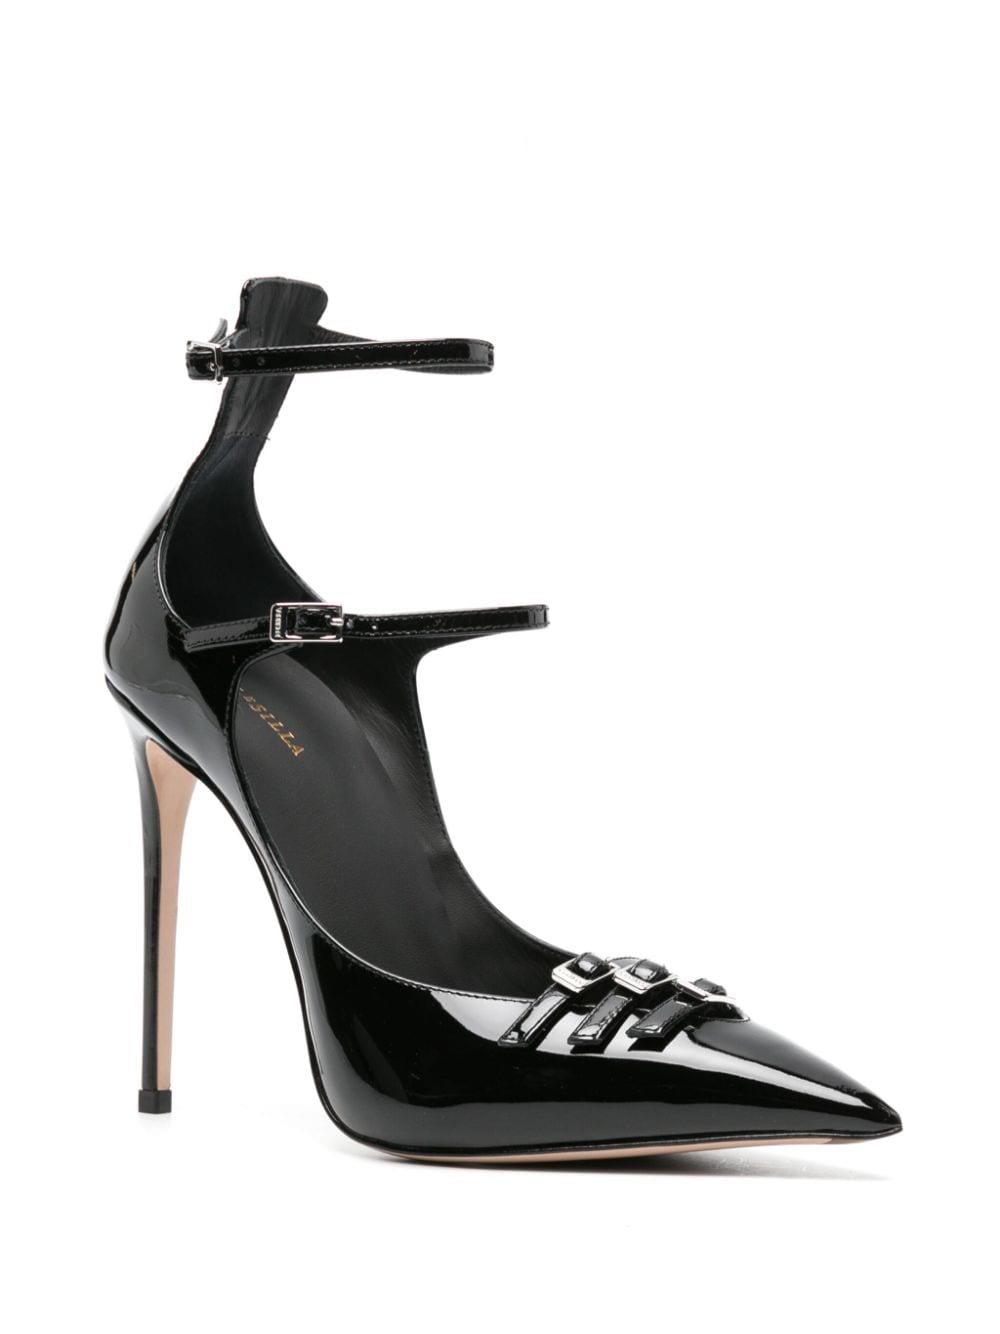 Image 2 of Le Silla Morgana 120mm leather pumps